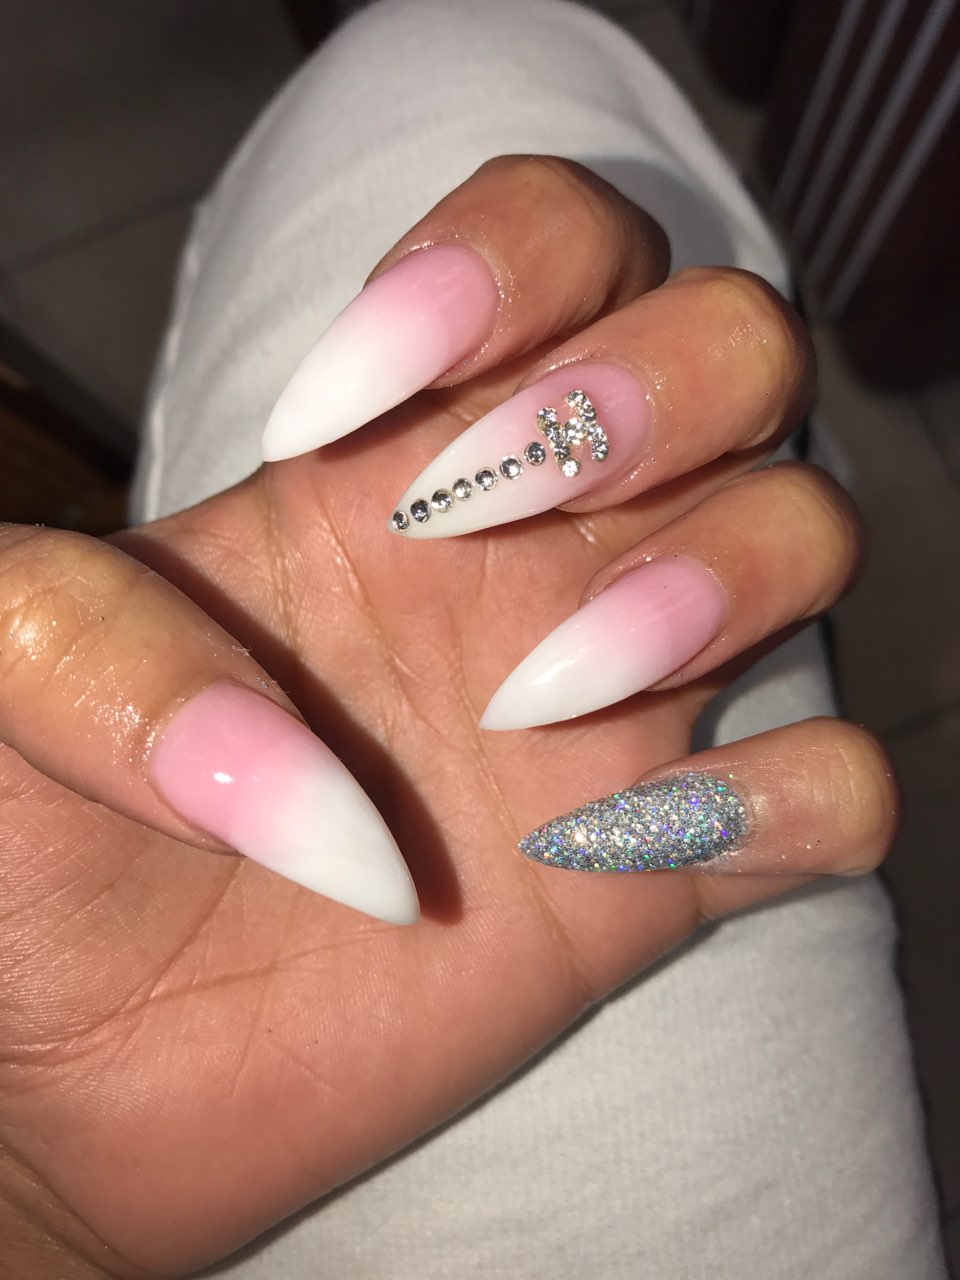 Pro Nails Spa 10% Off For All Services | 793 Crescent St #2, Brockton, MA 02302 | Phone: (508) 587-2971